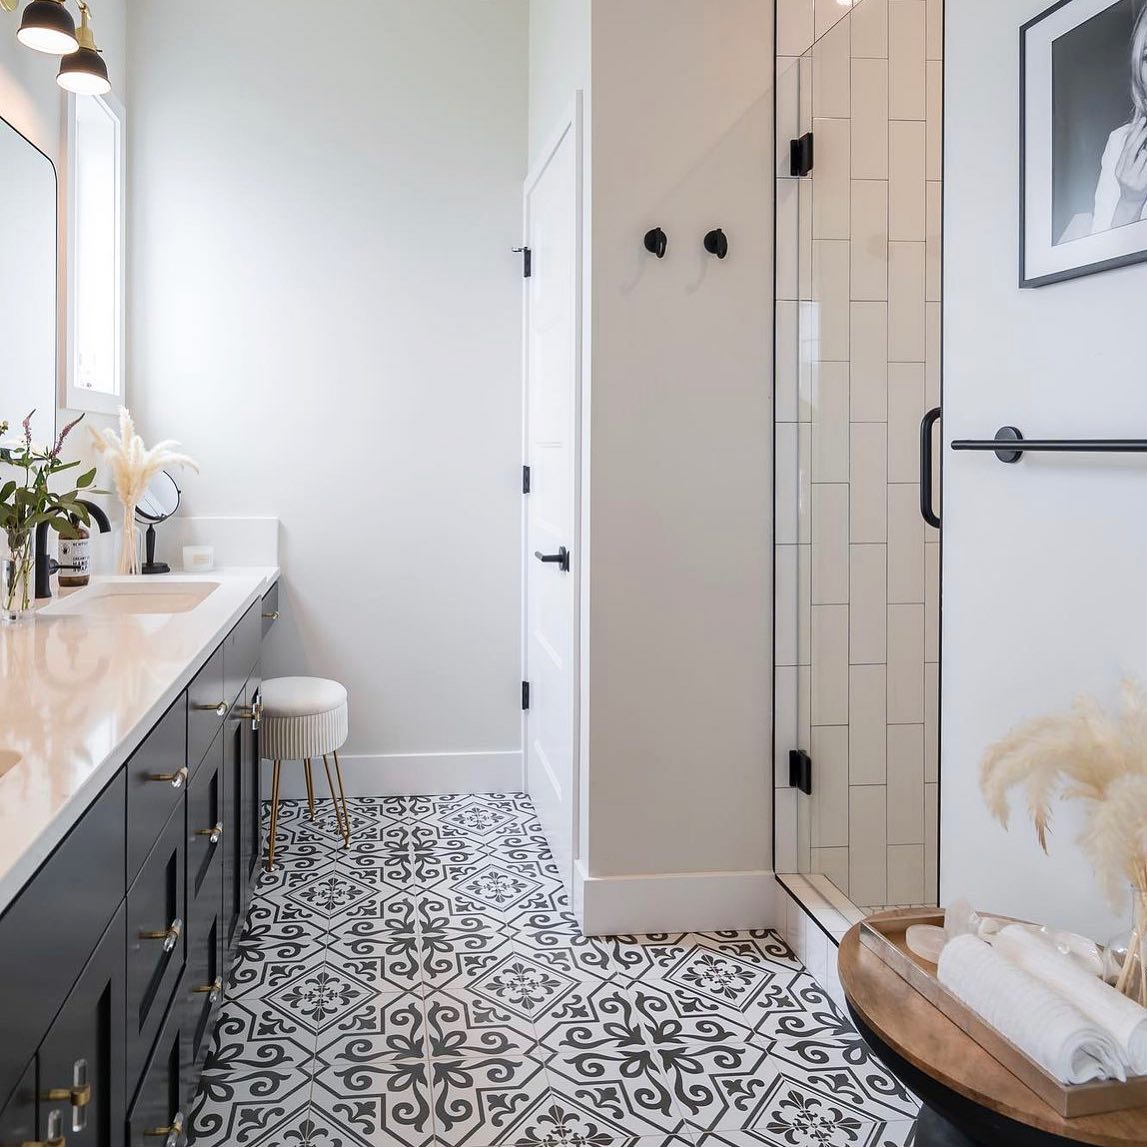 Patterned tile + a bold cabinet color makes for a dream statement space. We love these selections from @zehrinteriors ft. our Nostalgia tile in the color “epic”#emsertile